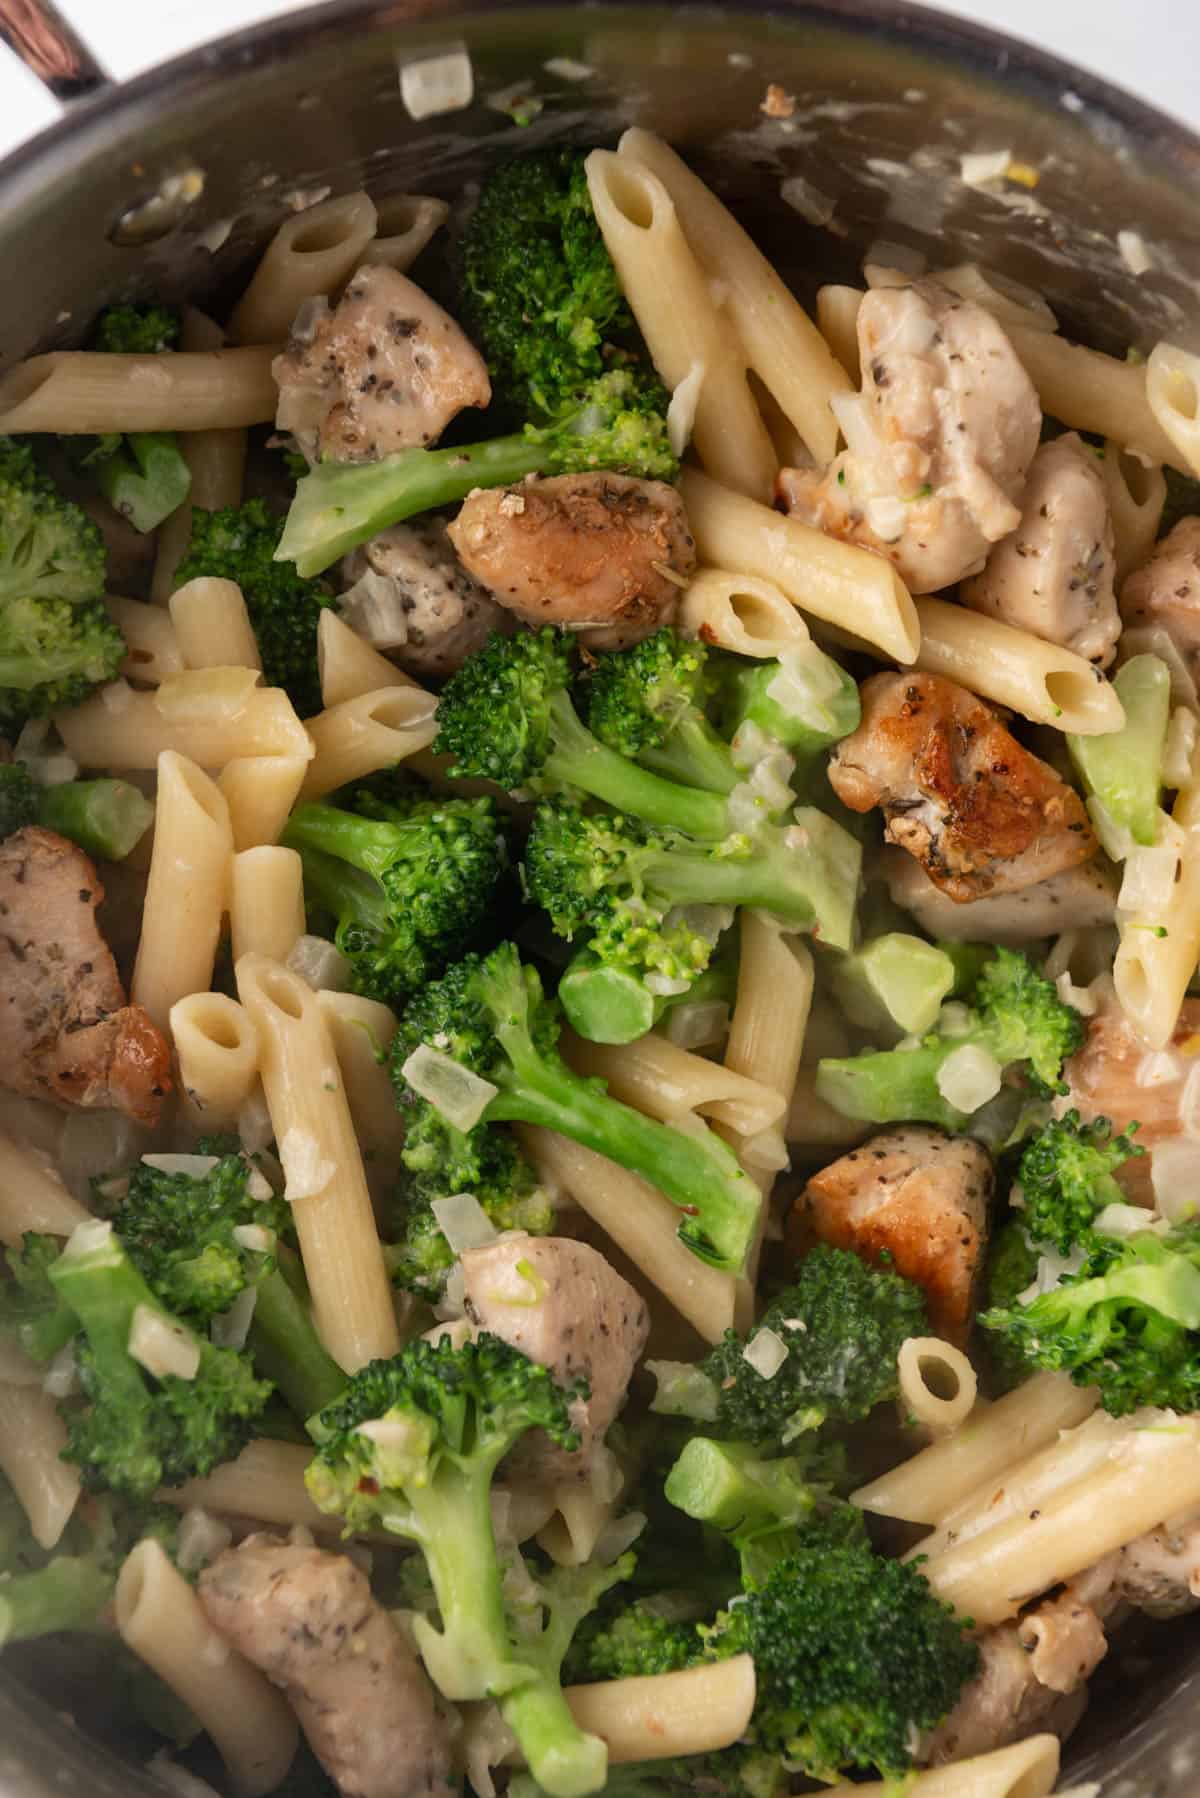 A close up image of chicken broccoli pasta in a large pot.